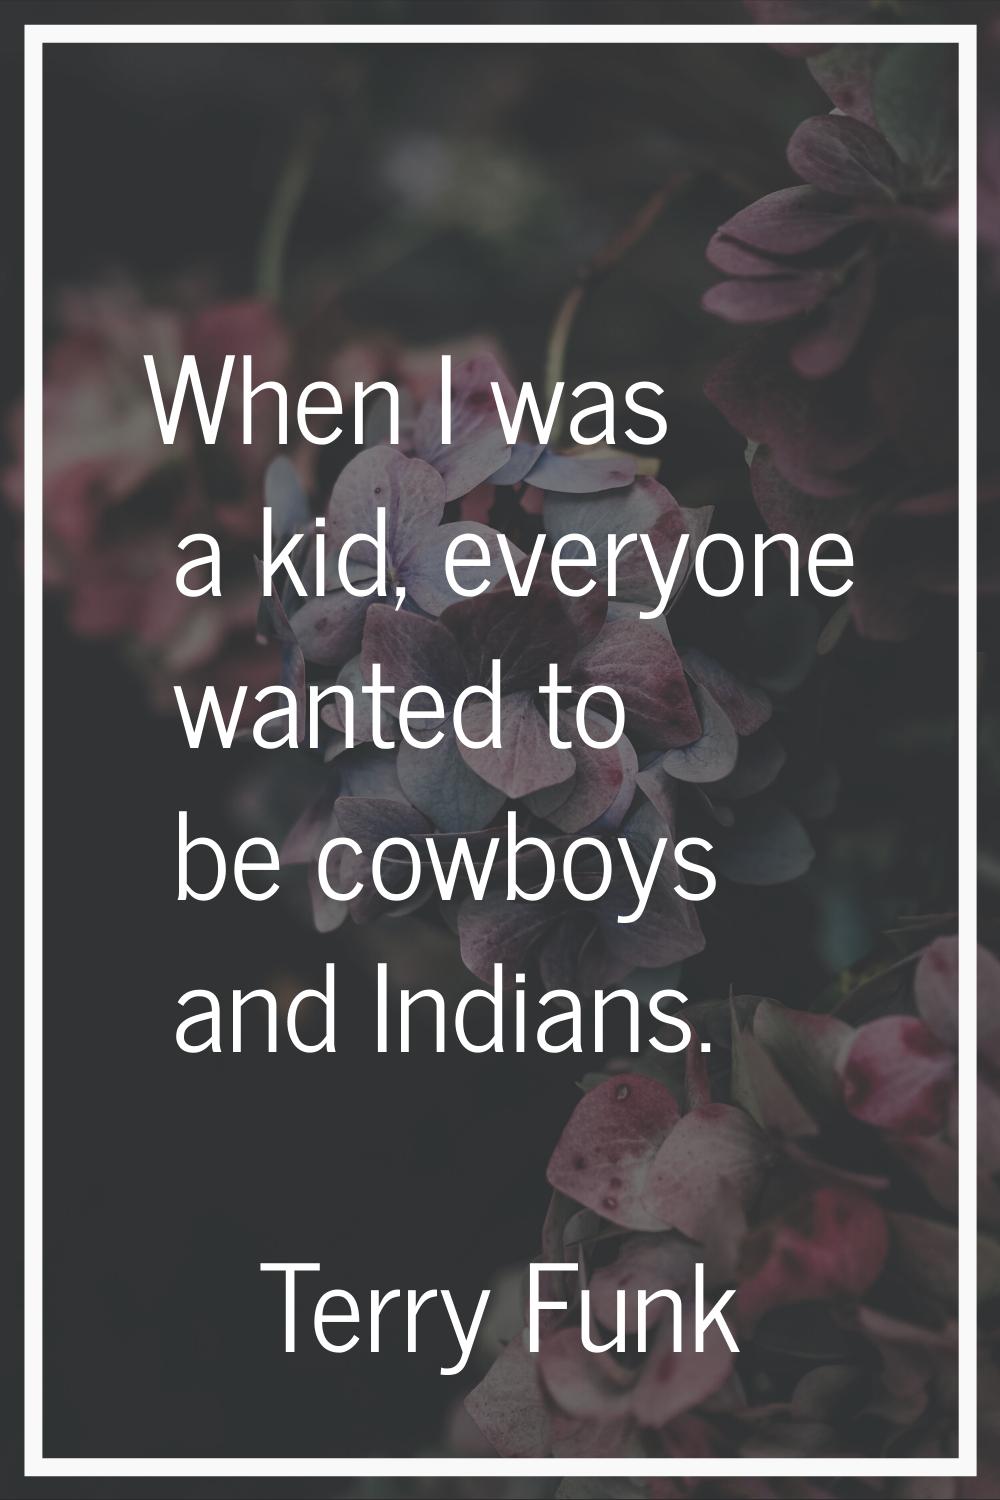 When I was a kid, everyone wanted to be cowboys and Indians.